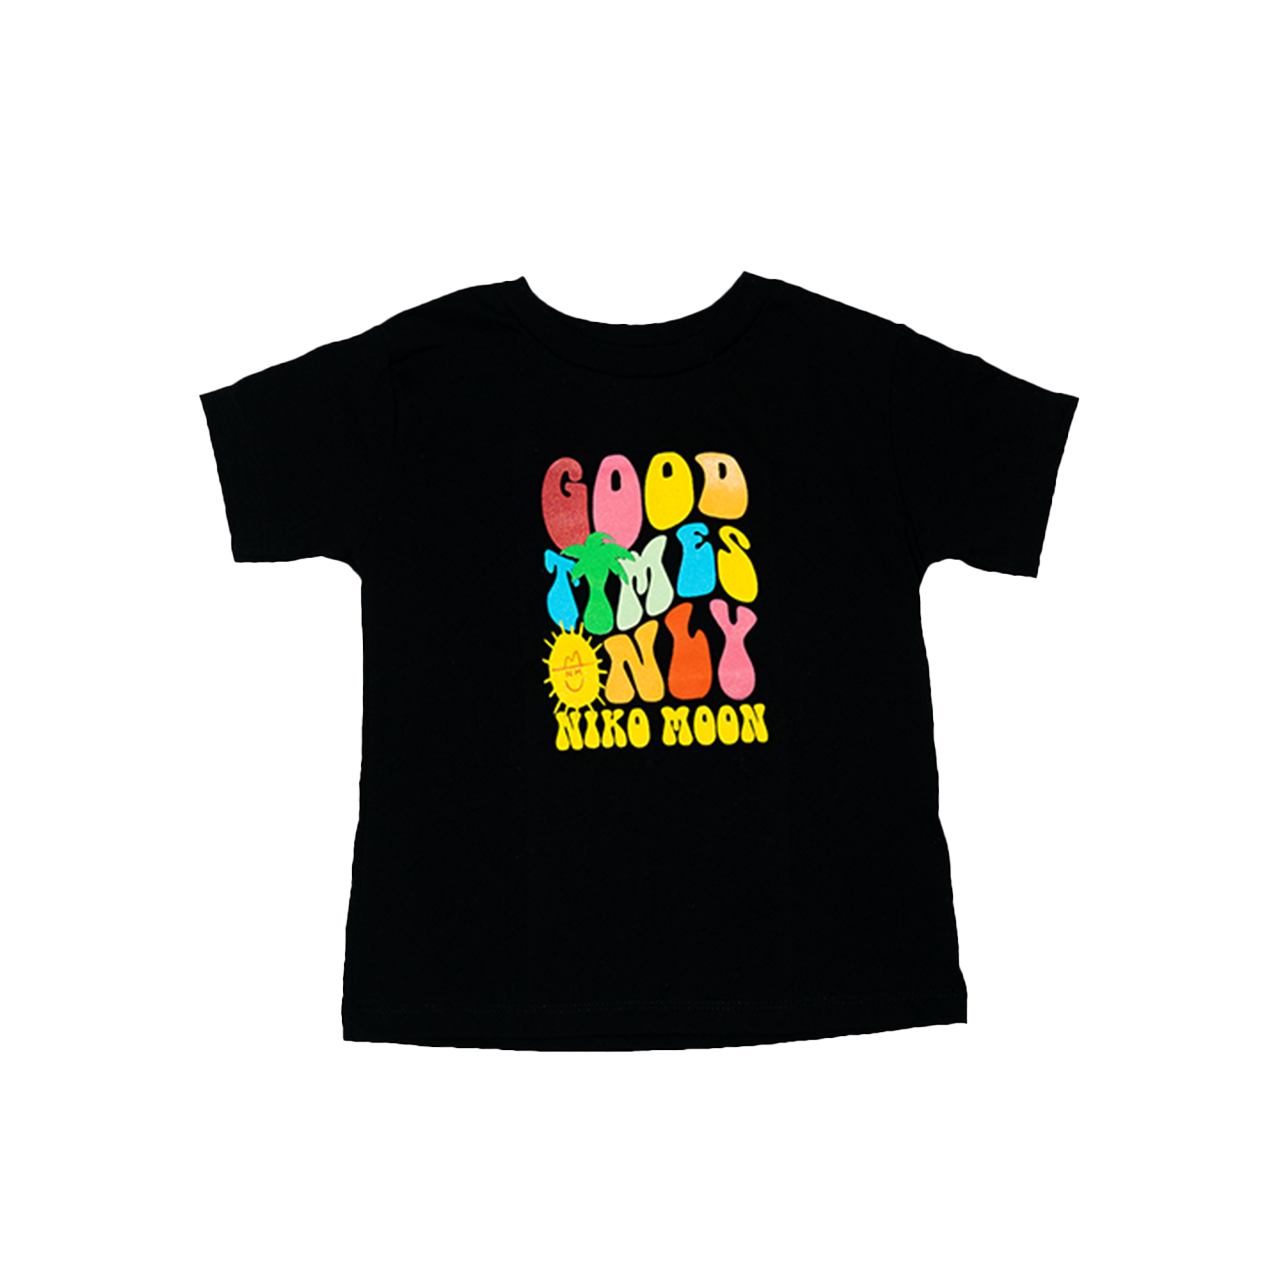 Good Times Only Toddler Tee